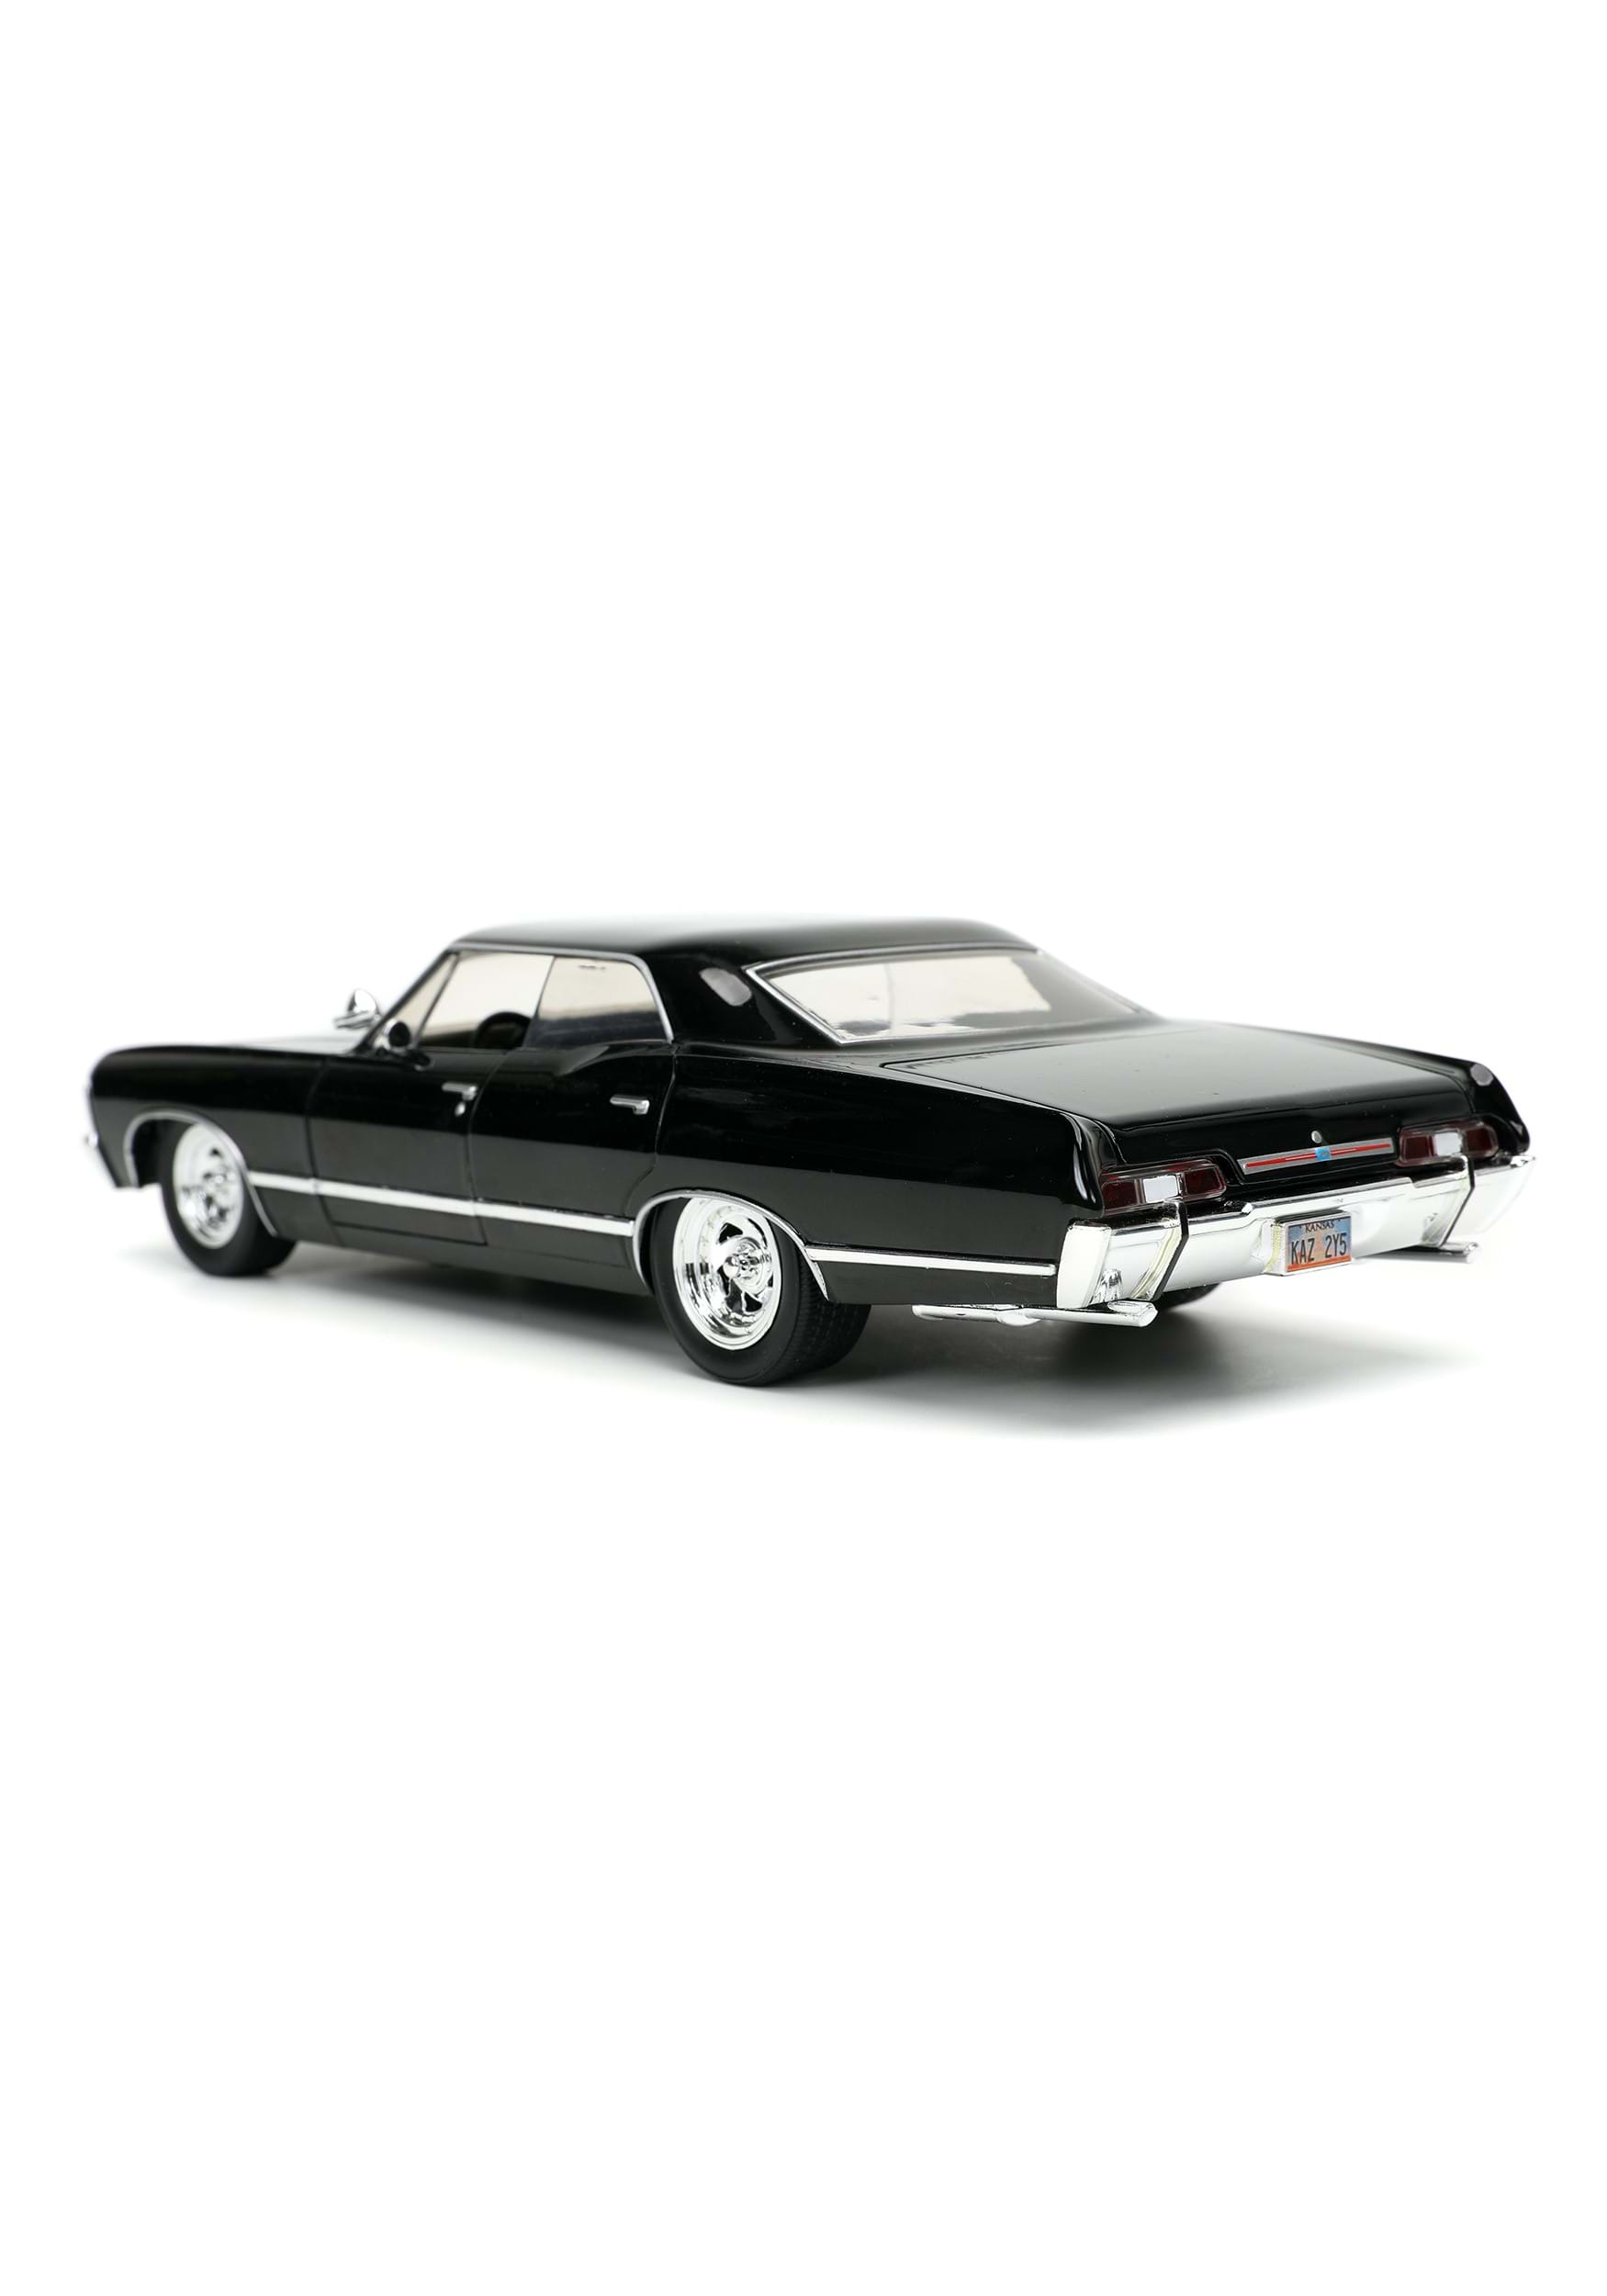 1:24 '67 Chevy Impala with Dean from Supernatural